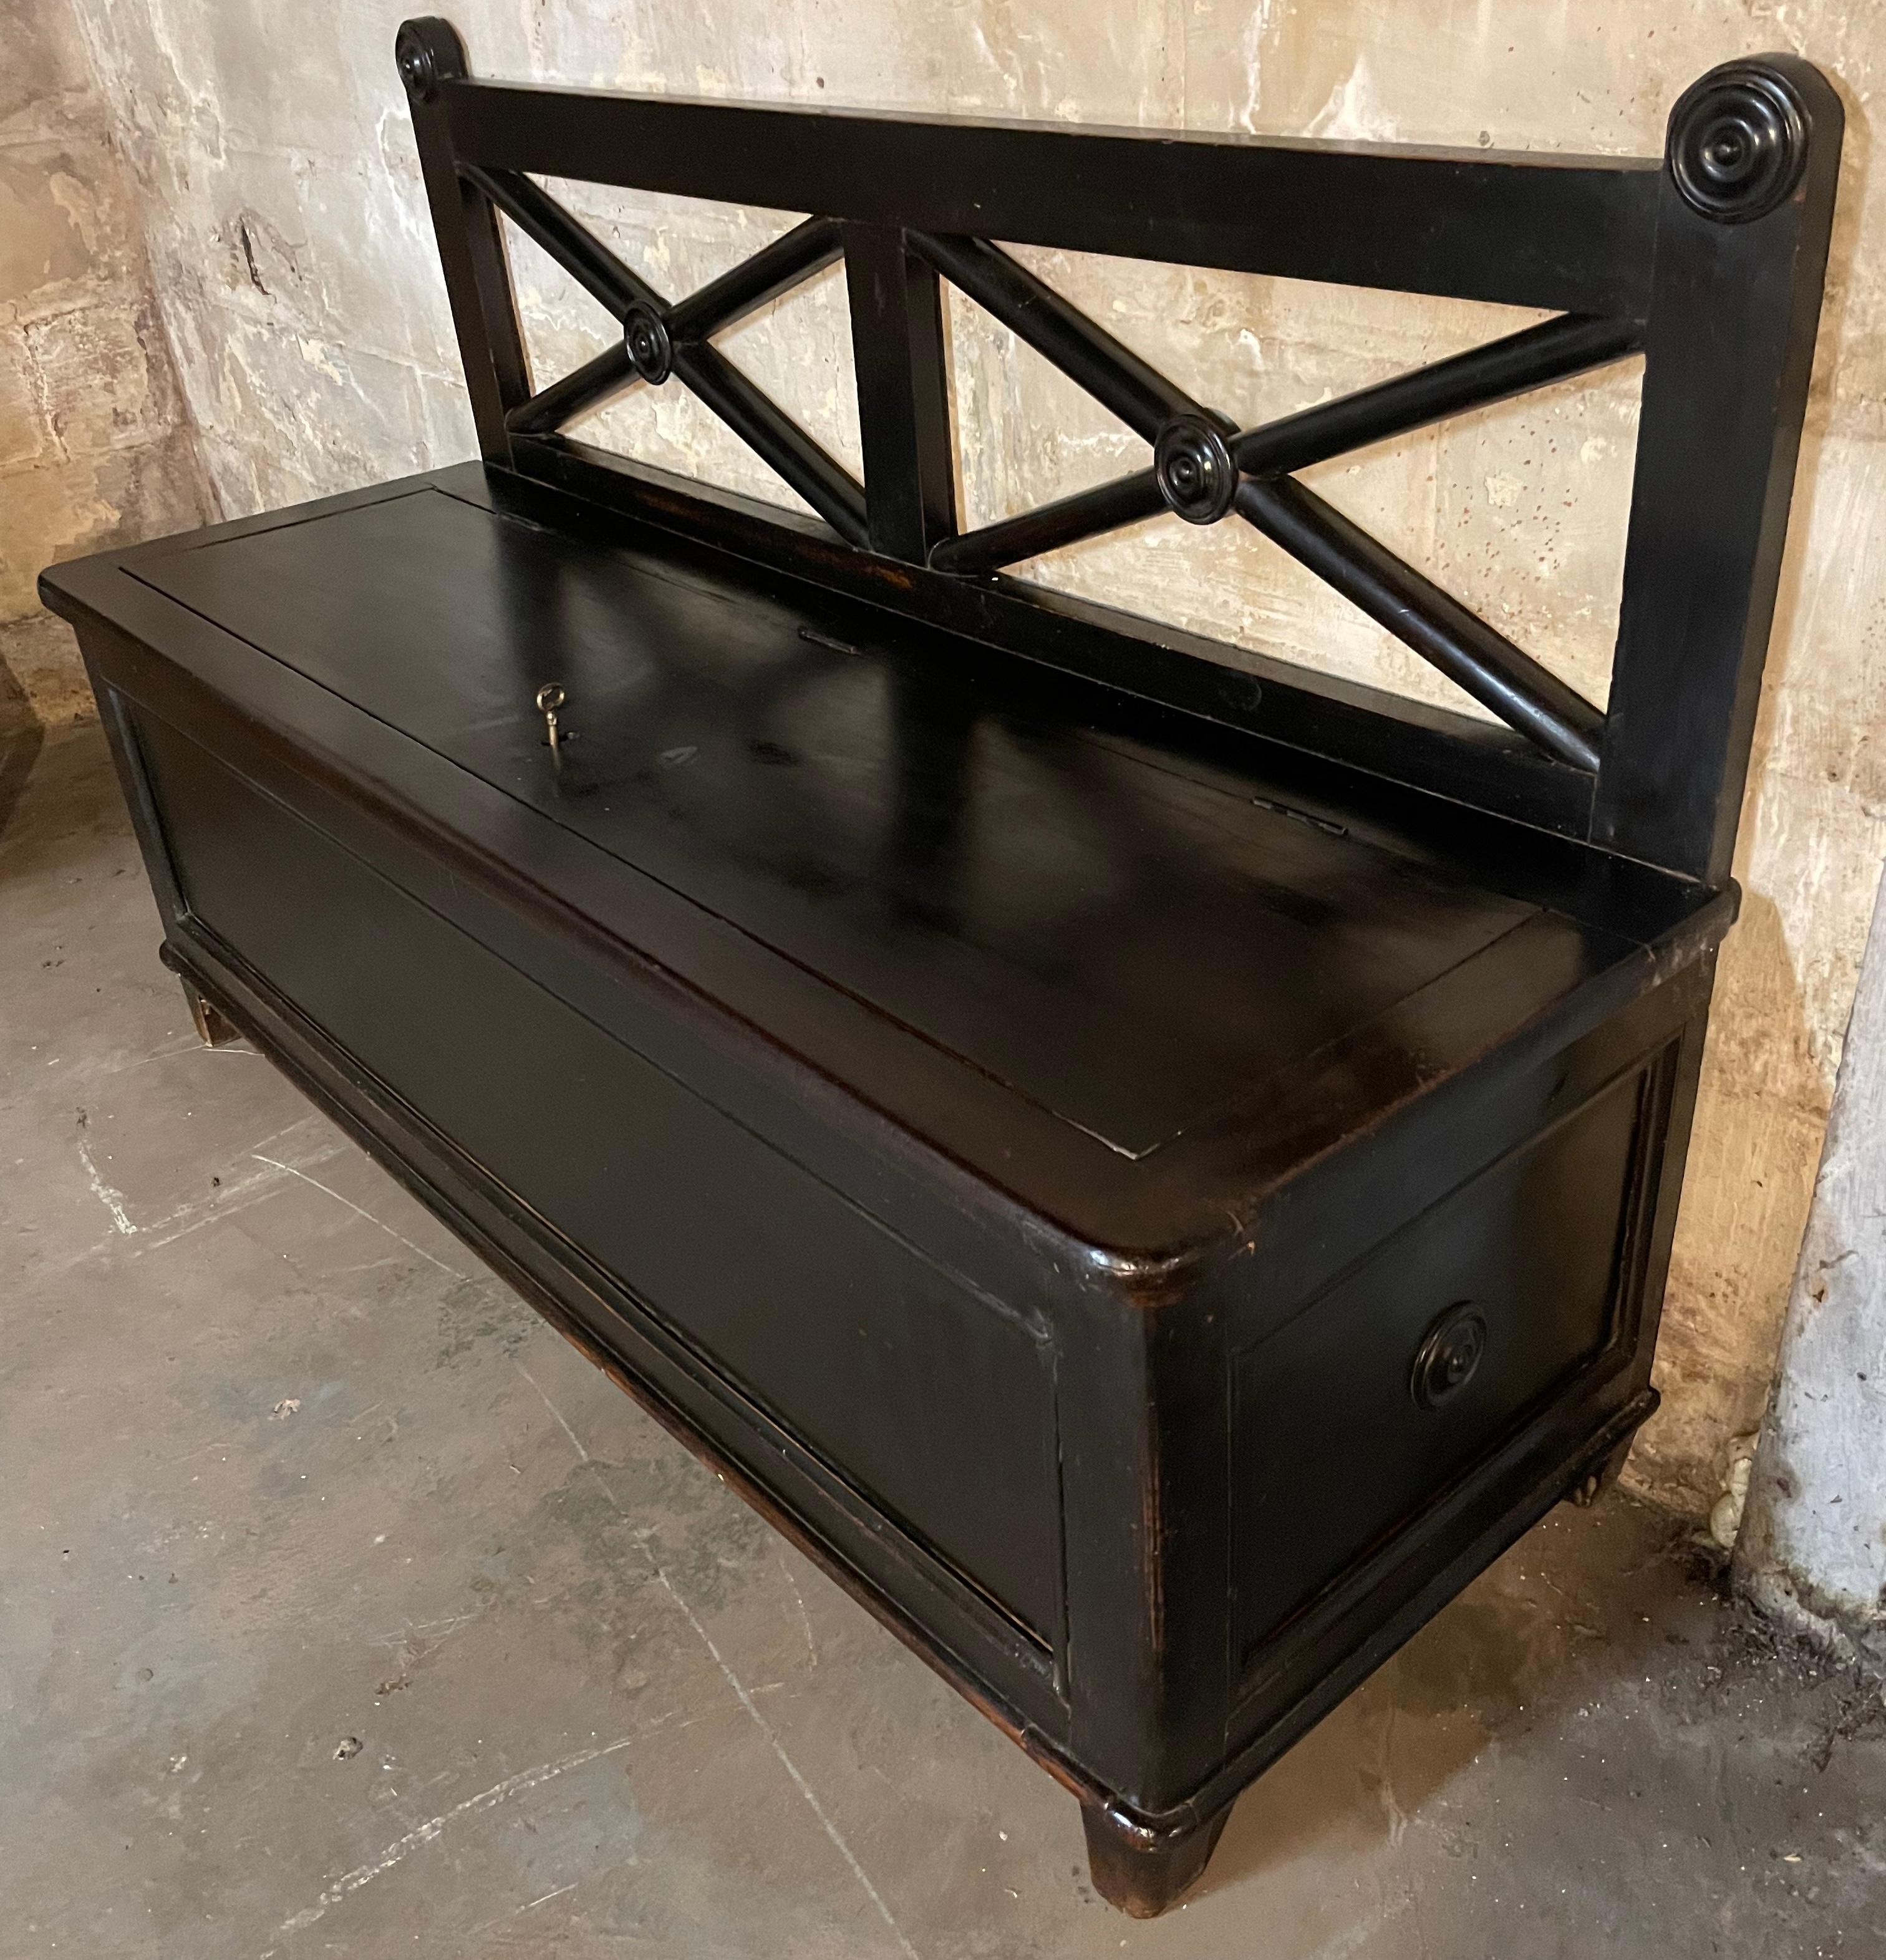 Neoclassical style bench. Severely handsome provincial neoclassical style dark stained wood bench with open double ‘X’ form back and circular metopes terminals at back and sides above long bench with keyed lock storage’s compartment for interior